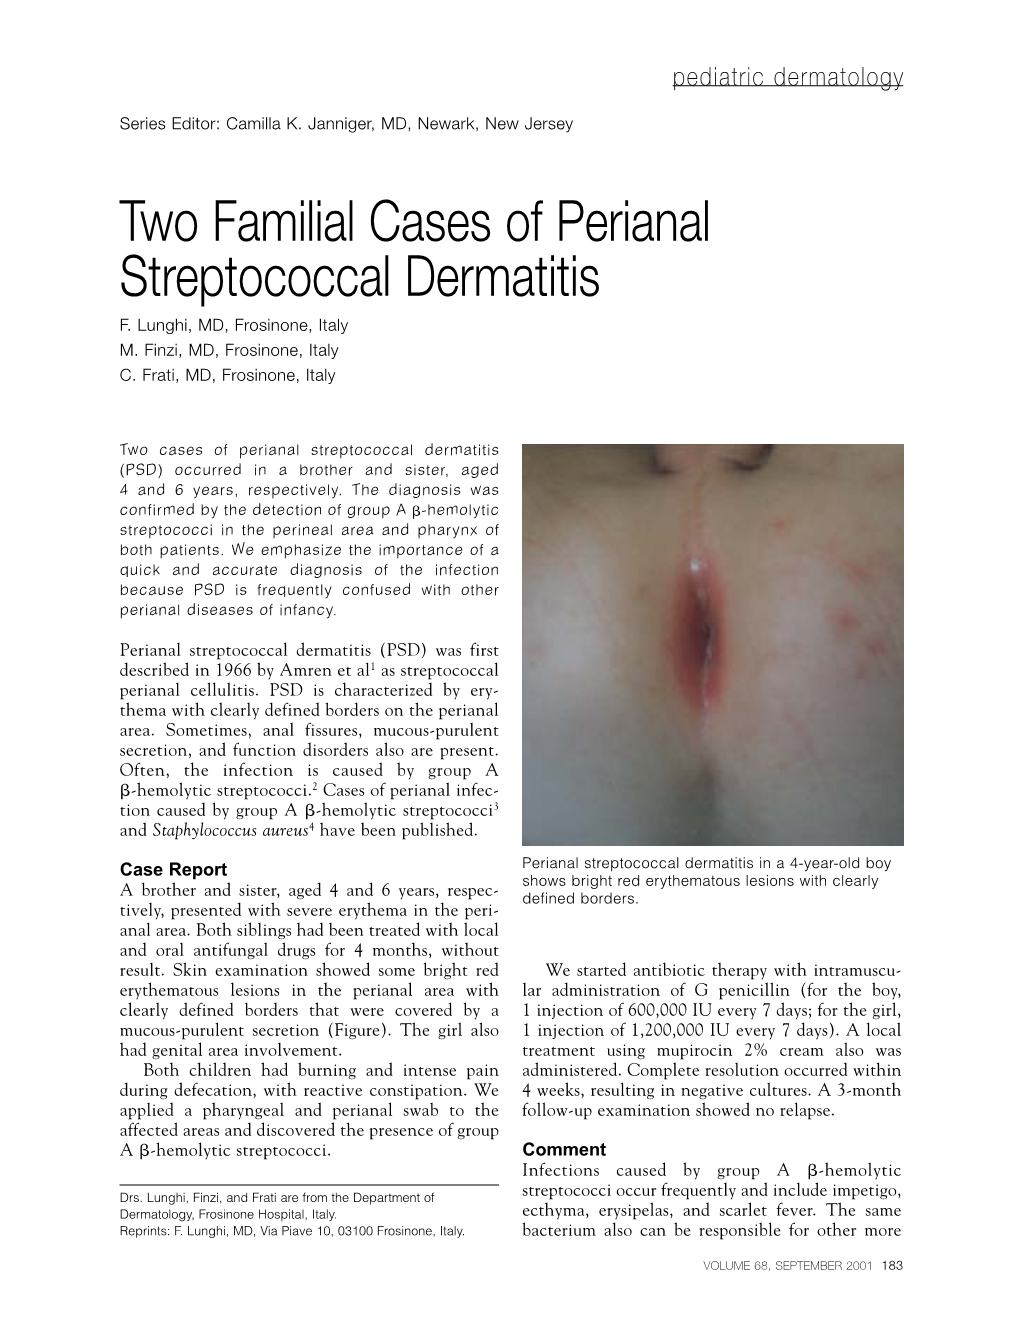 Two Familial Cases of Perianal Streptococcal Dermatitis F